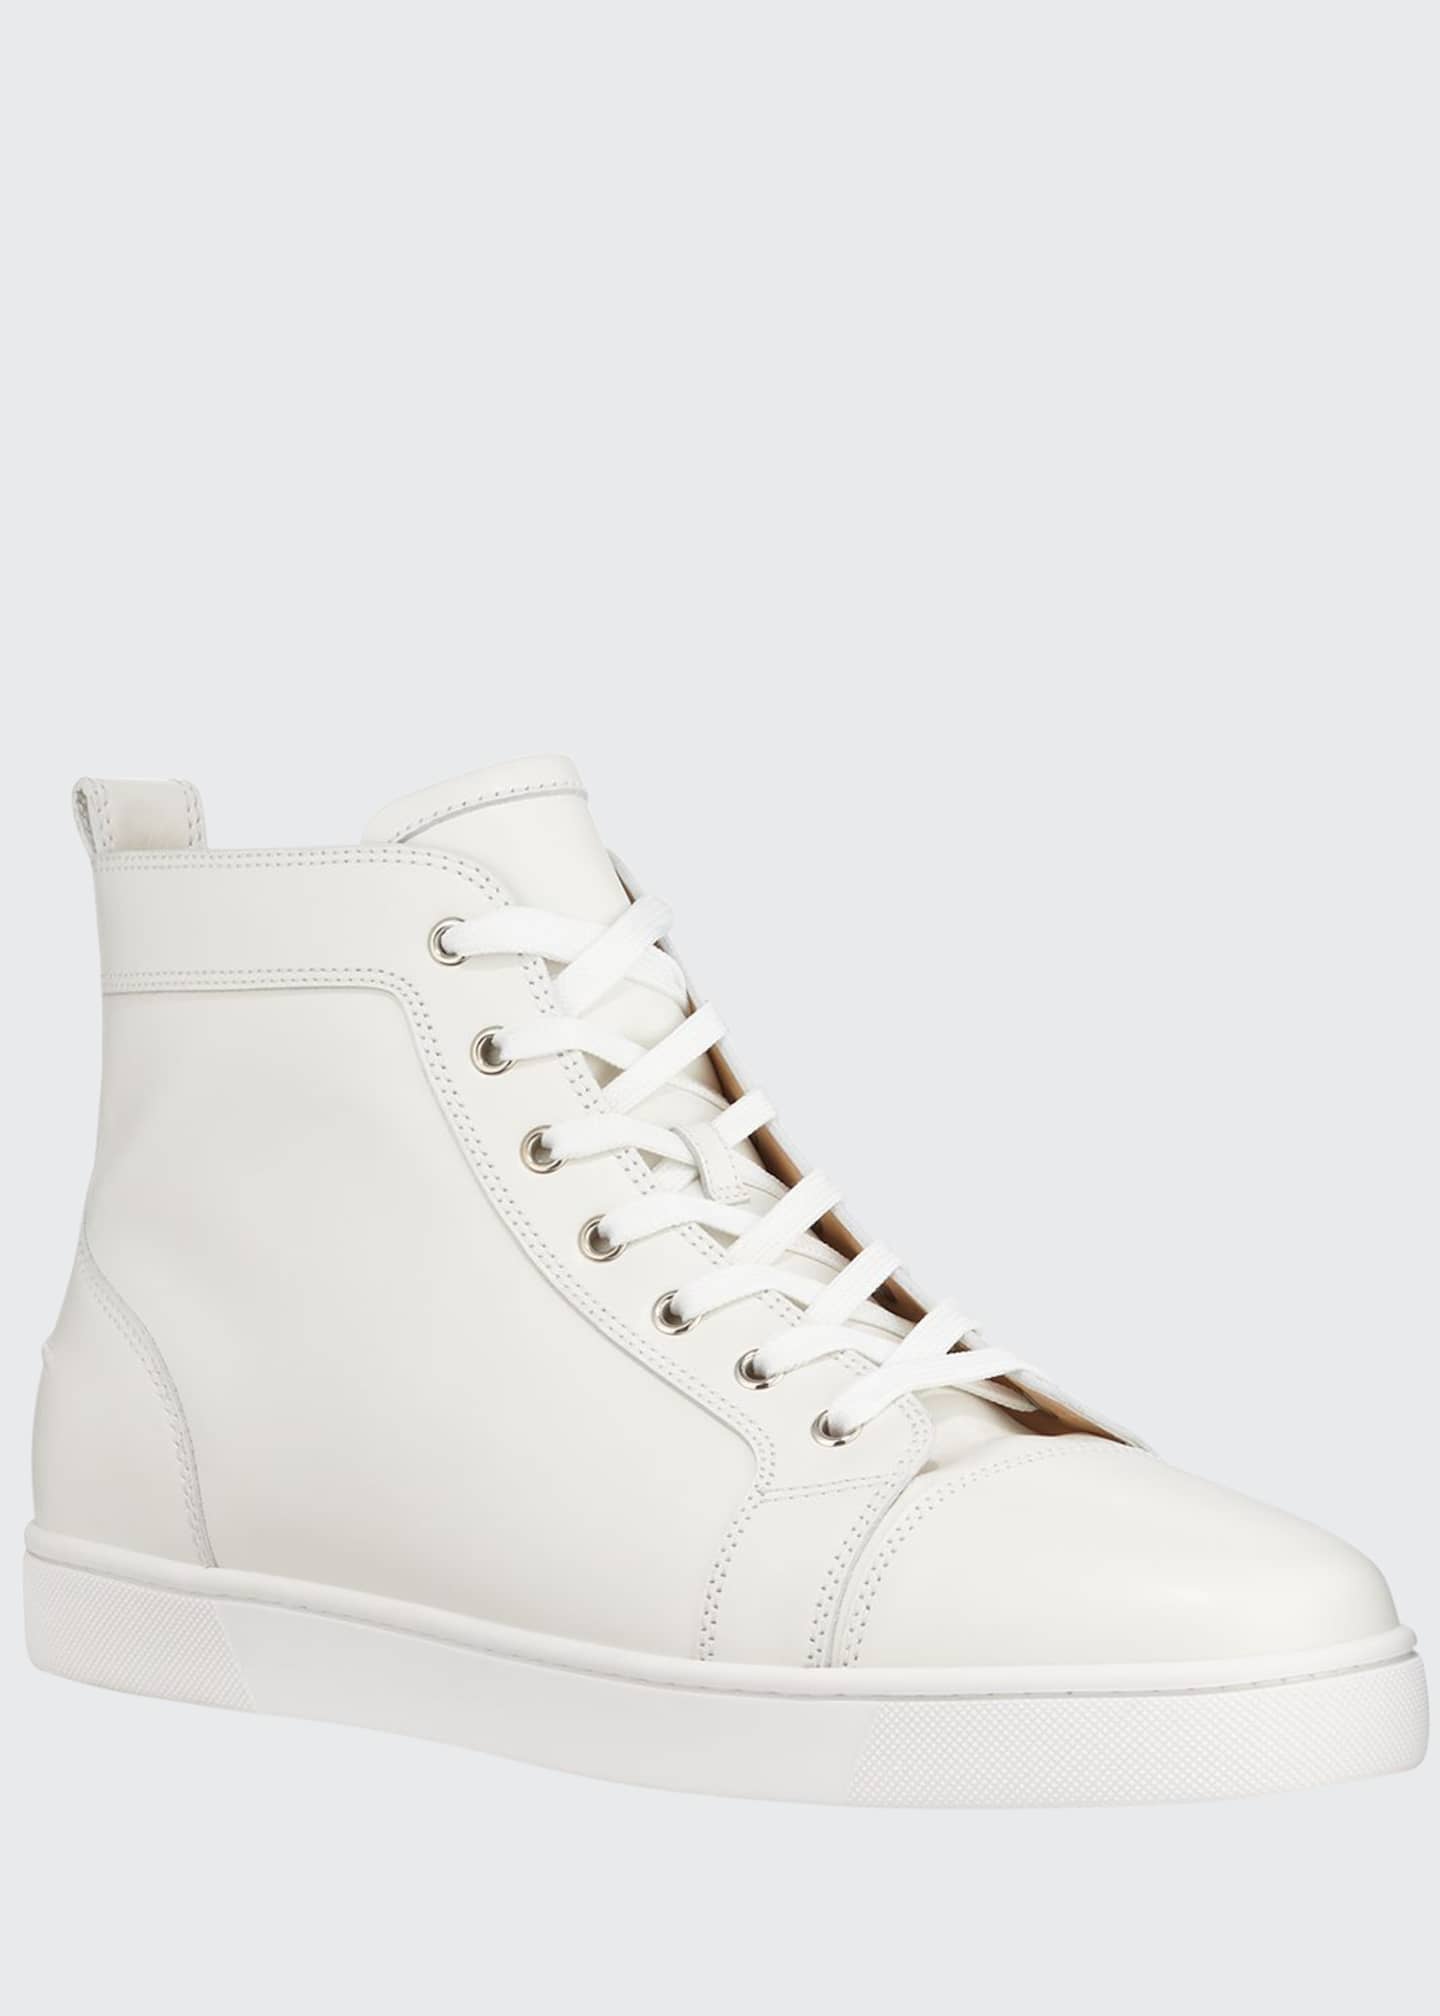 Christian Louboutin Men's Louis Leather High-Top Sneakers - Bergdorf ...